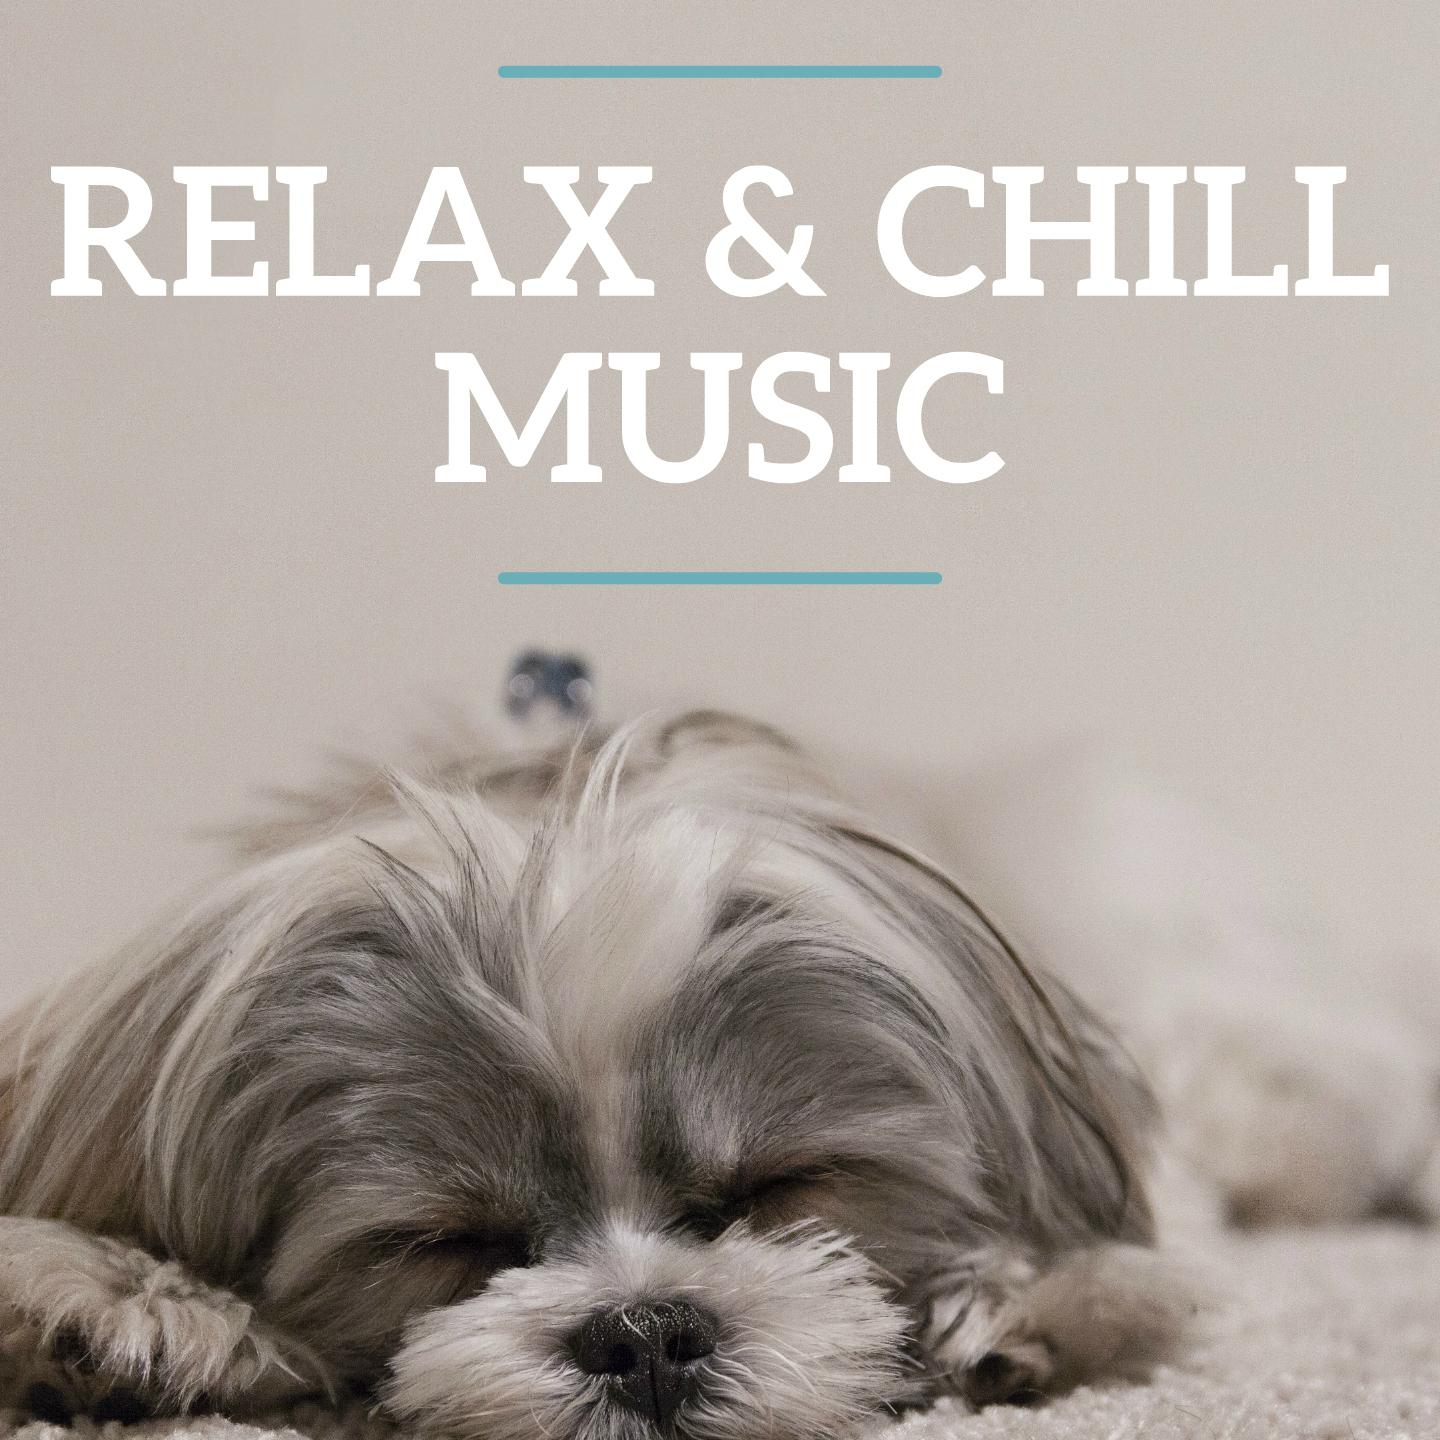 Relax & Chill Music